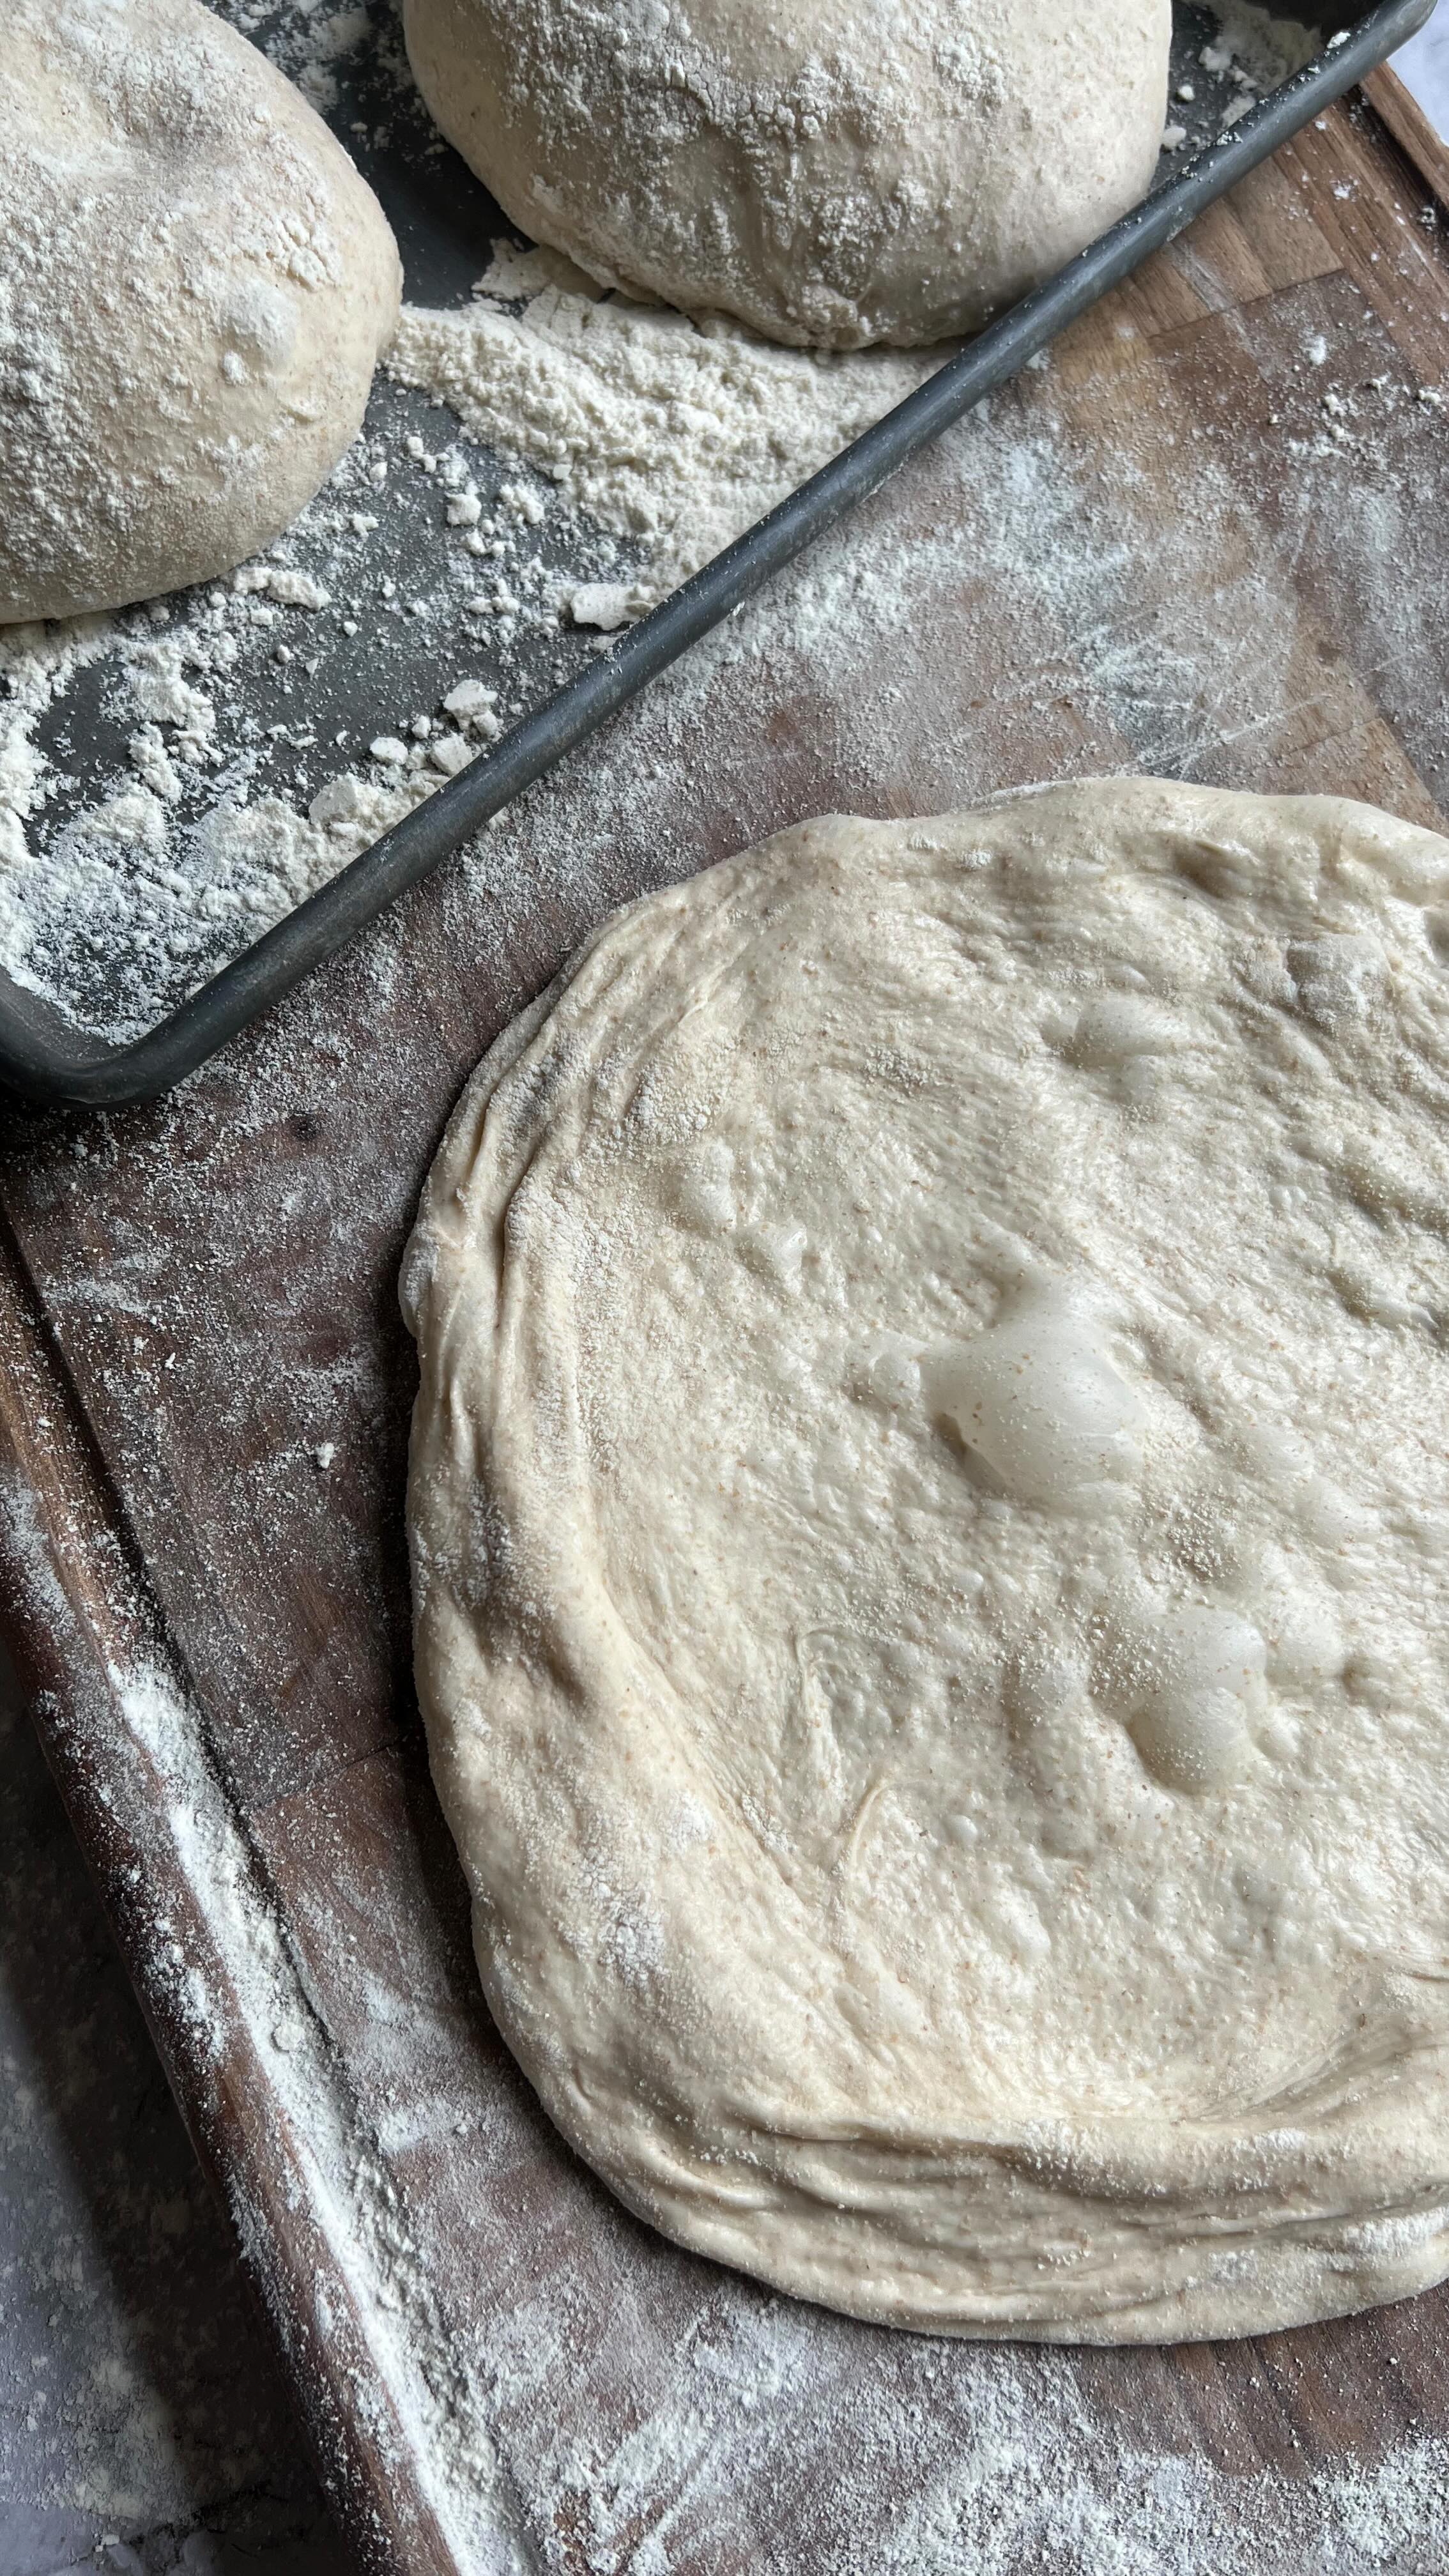 PIZZA DOUGH

If you’d like the links to the detailed written recipe and tips on how to stretch out and freeze pizza doug